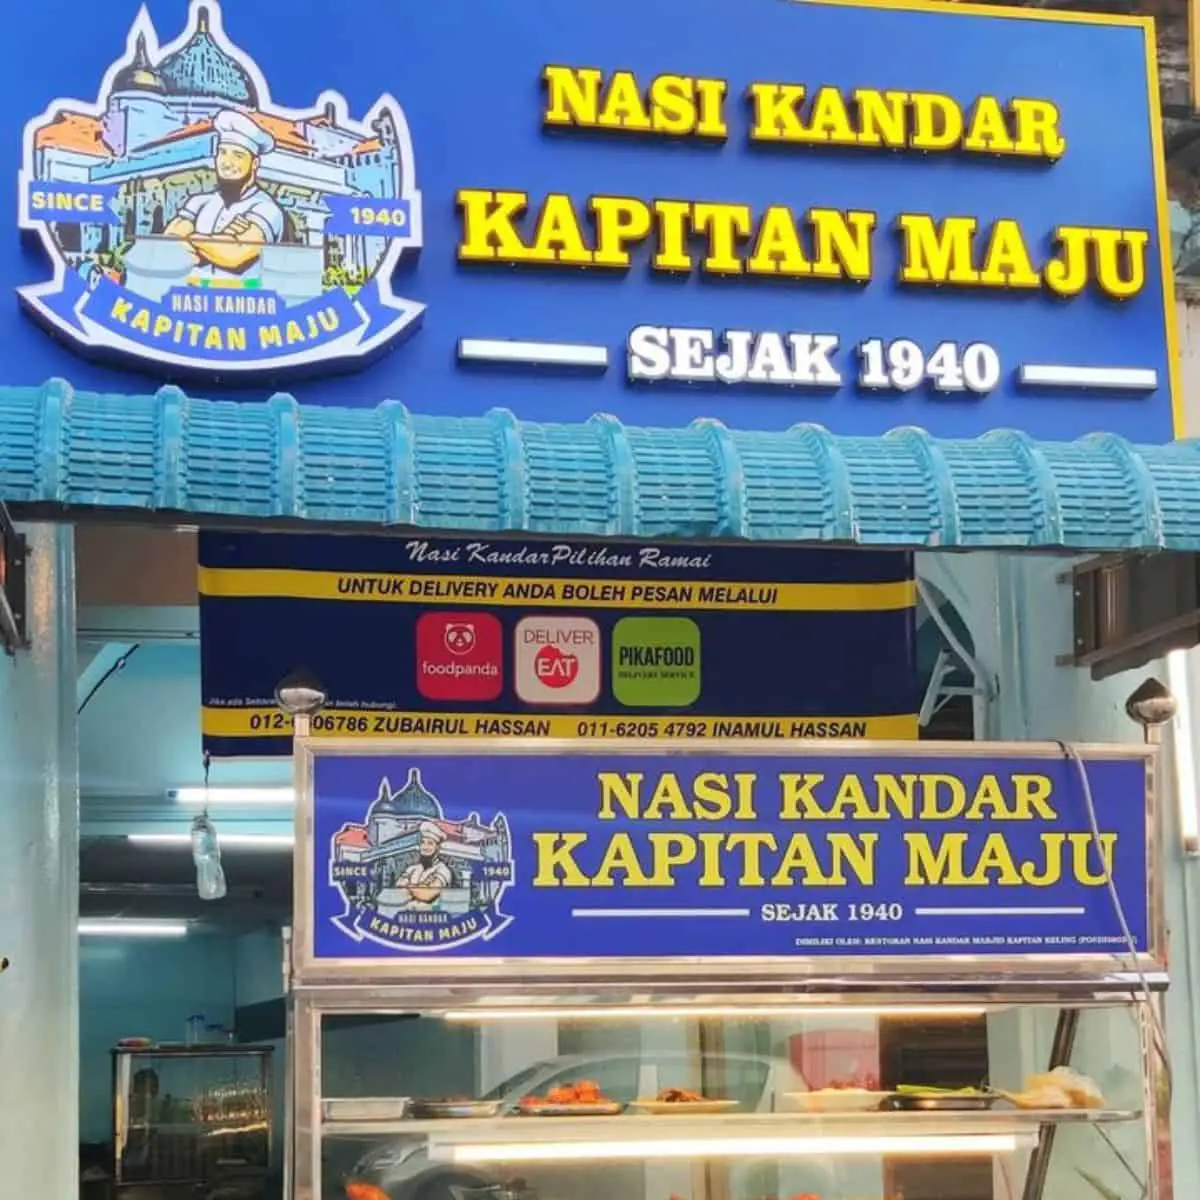  Front view of Kapitan Maju’s food house with blue and purple theme and food on display
